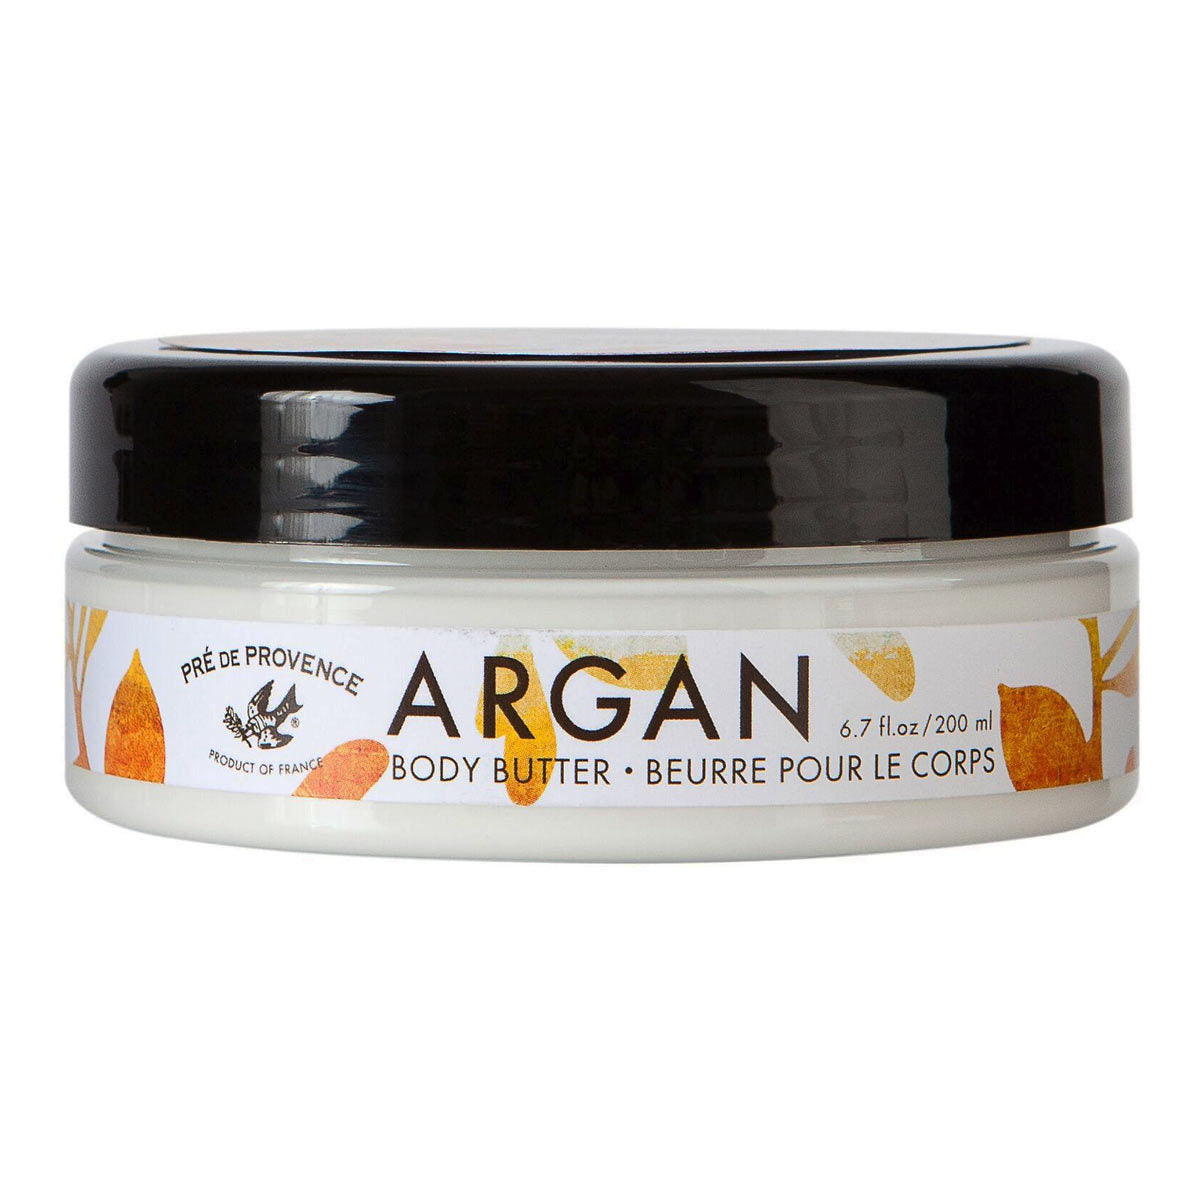 Primary image of Argan Oil Body Butter